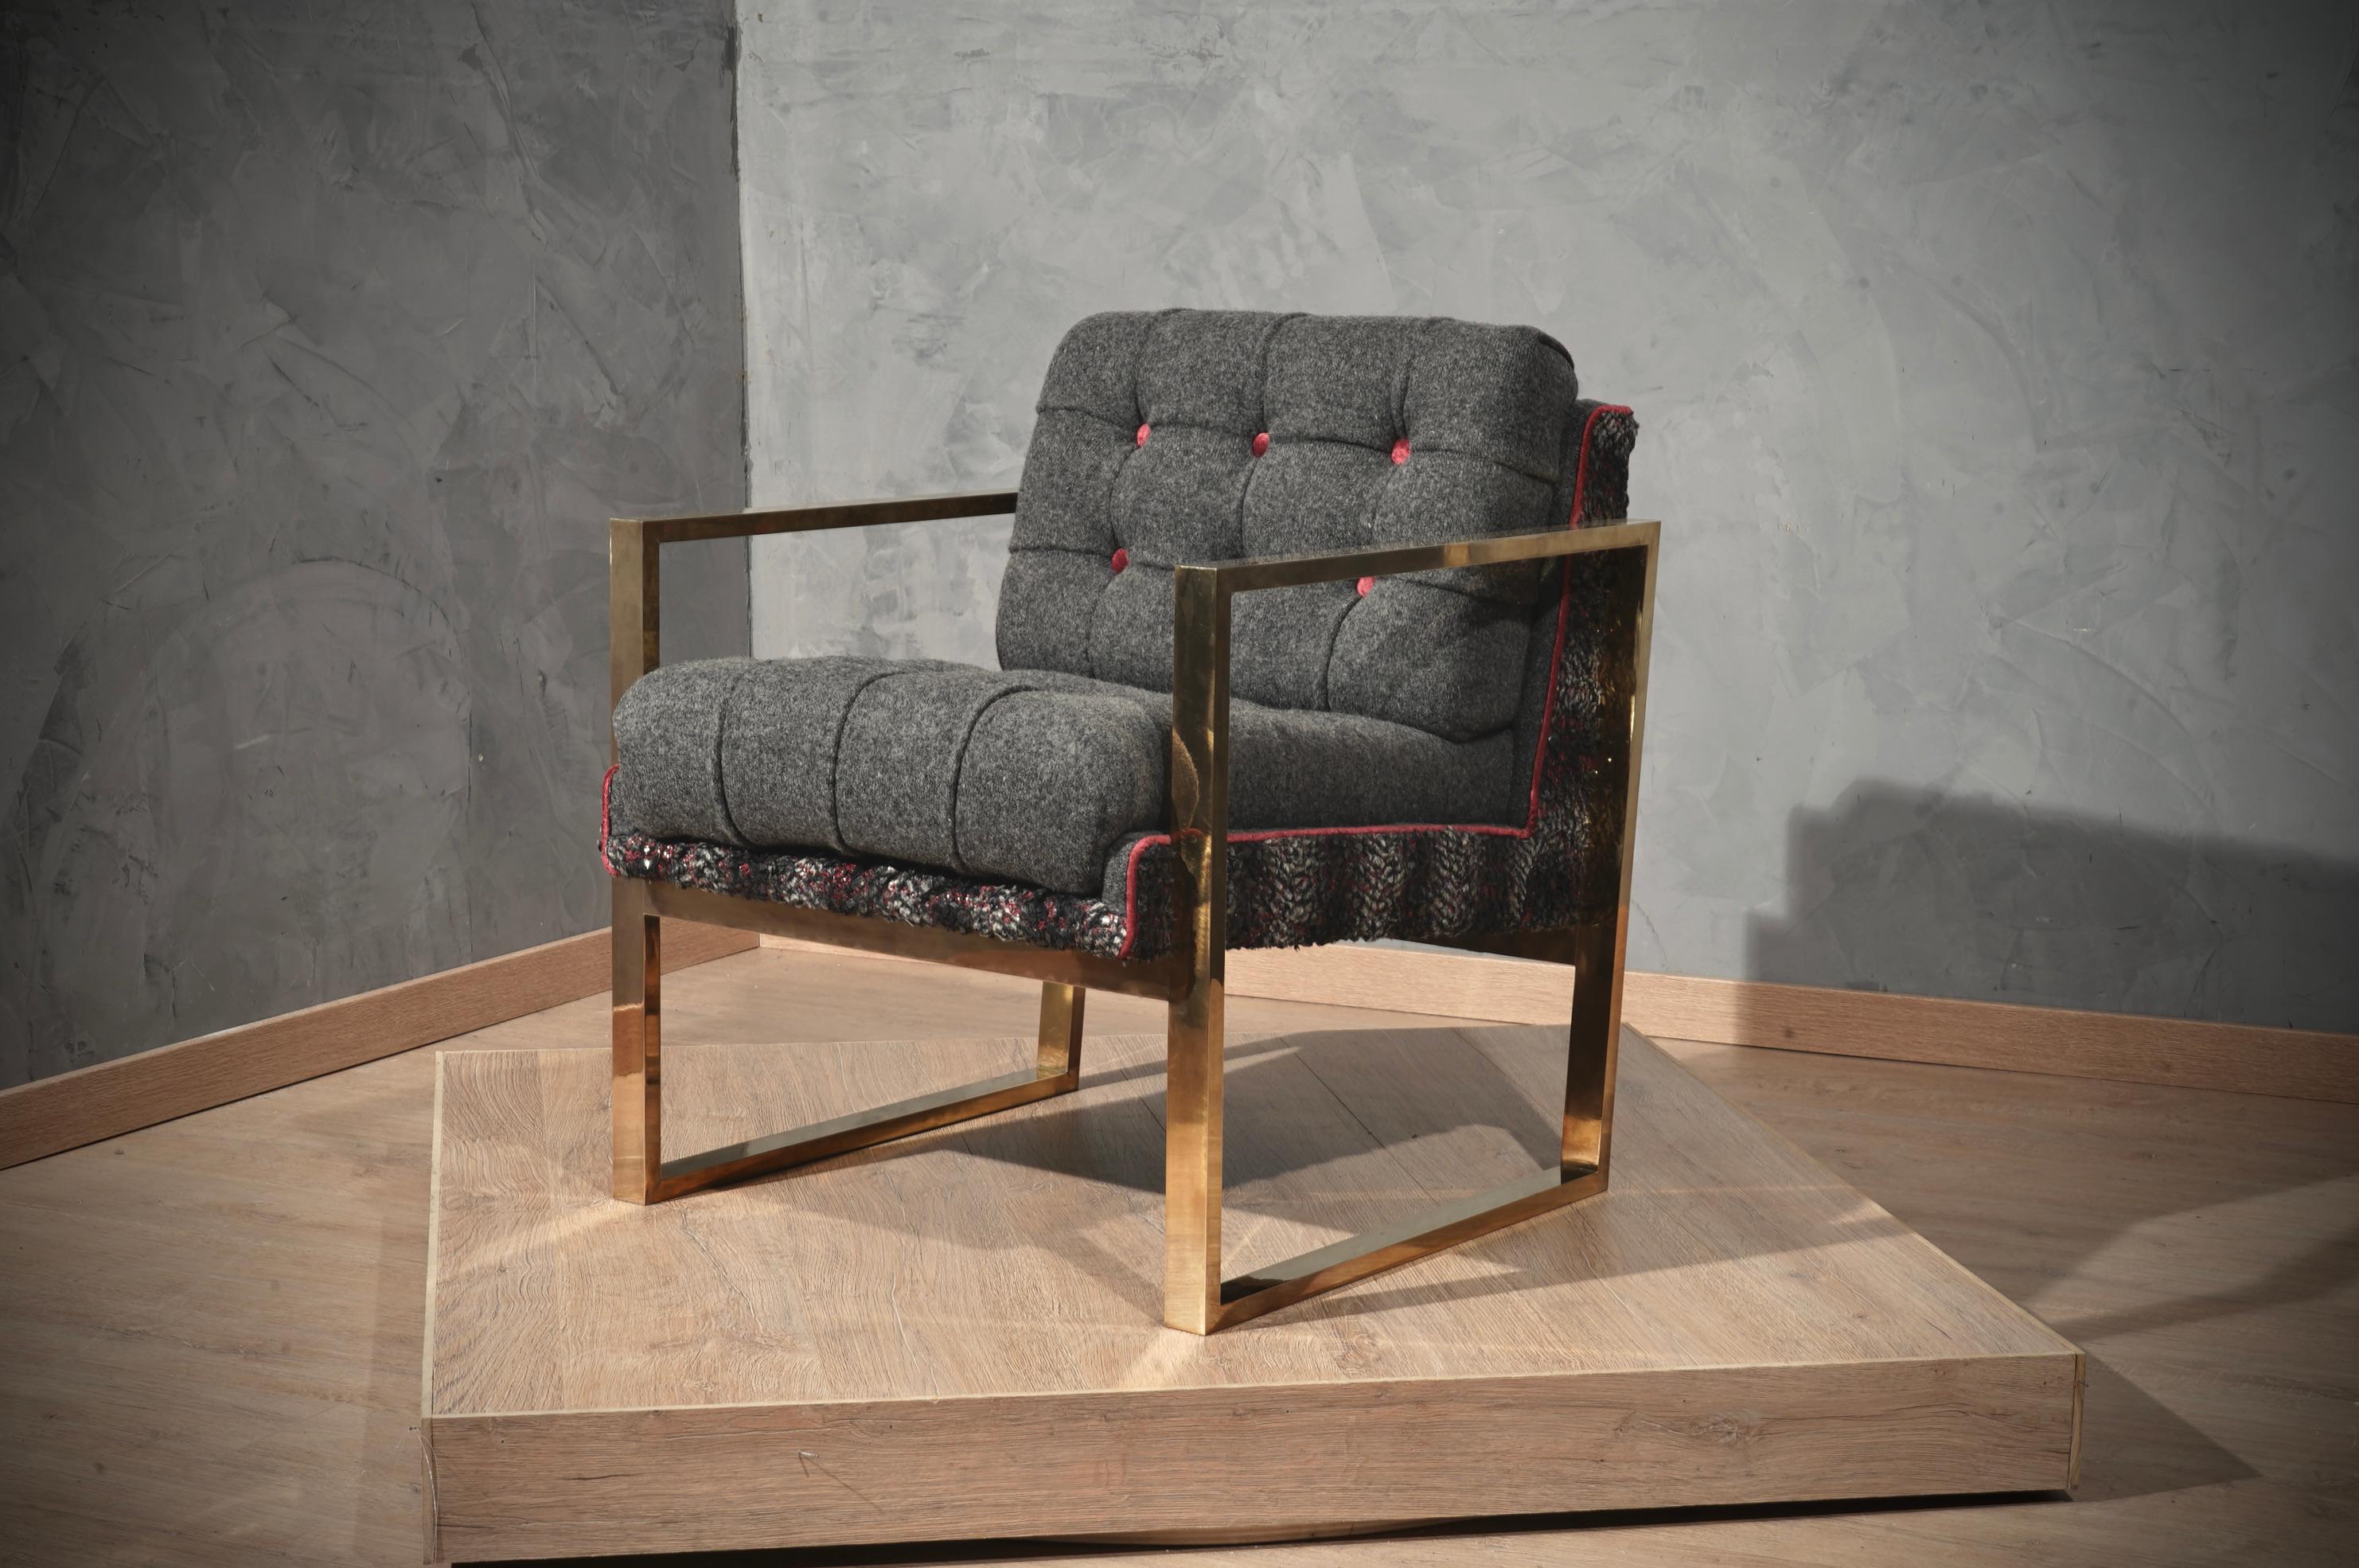 Brass structure and wool fabric, for this pair of armchairs out of the ordinary in the Italian style of Romeo Rega.

Linear and squared the structure of this armchairs, all in polished brass. While the seat and the backrest are in fine fabric. A